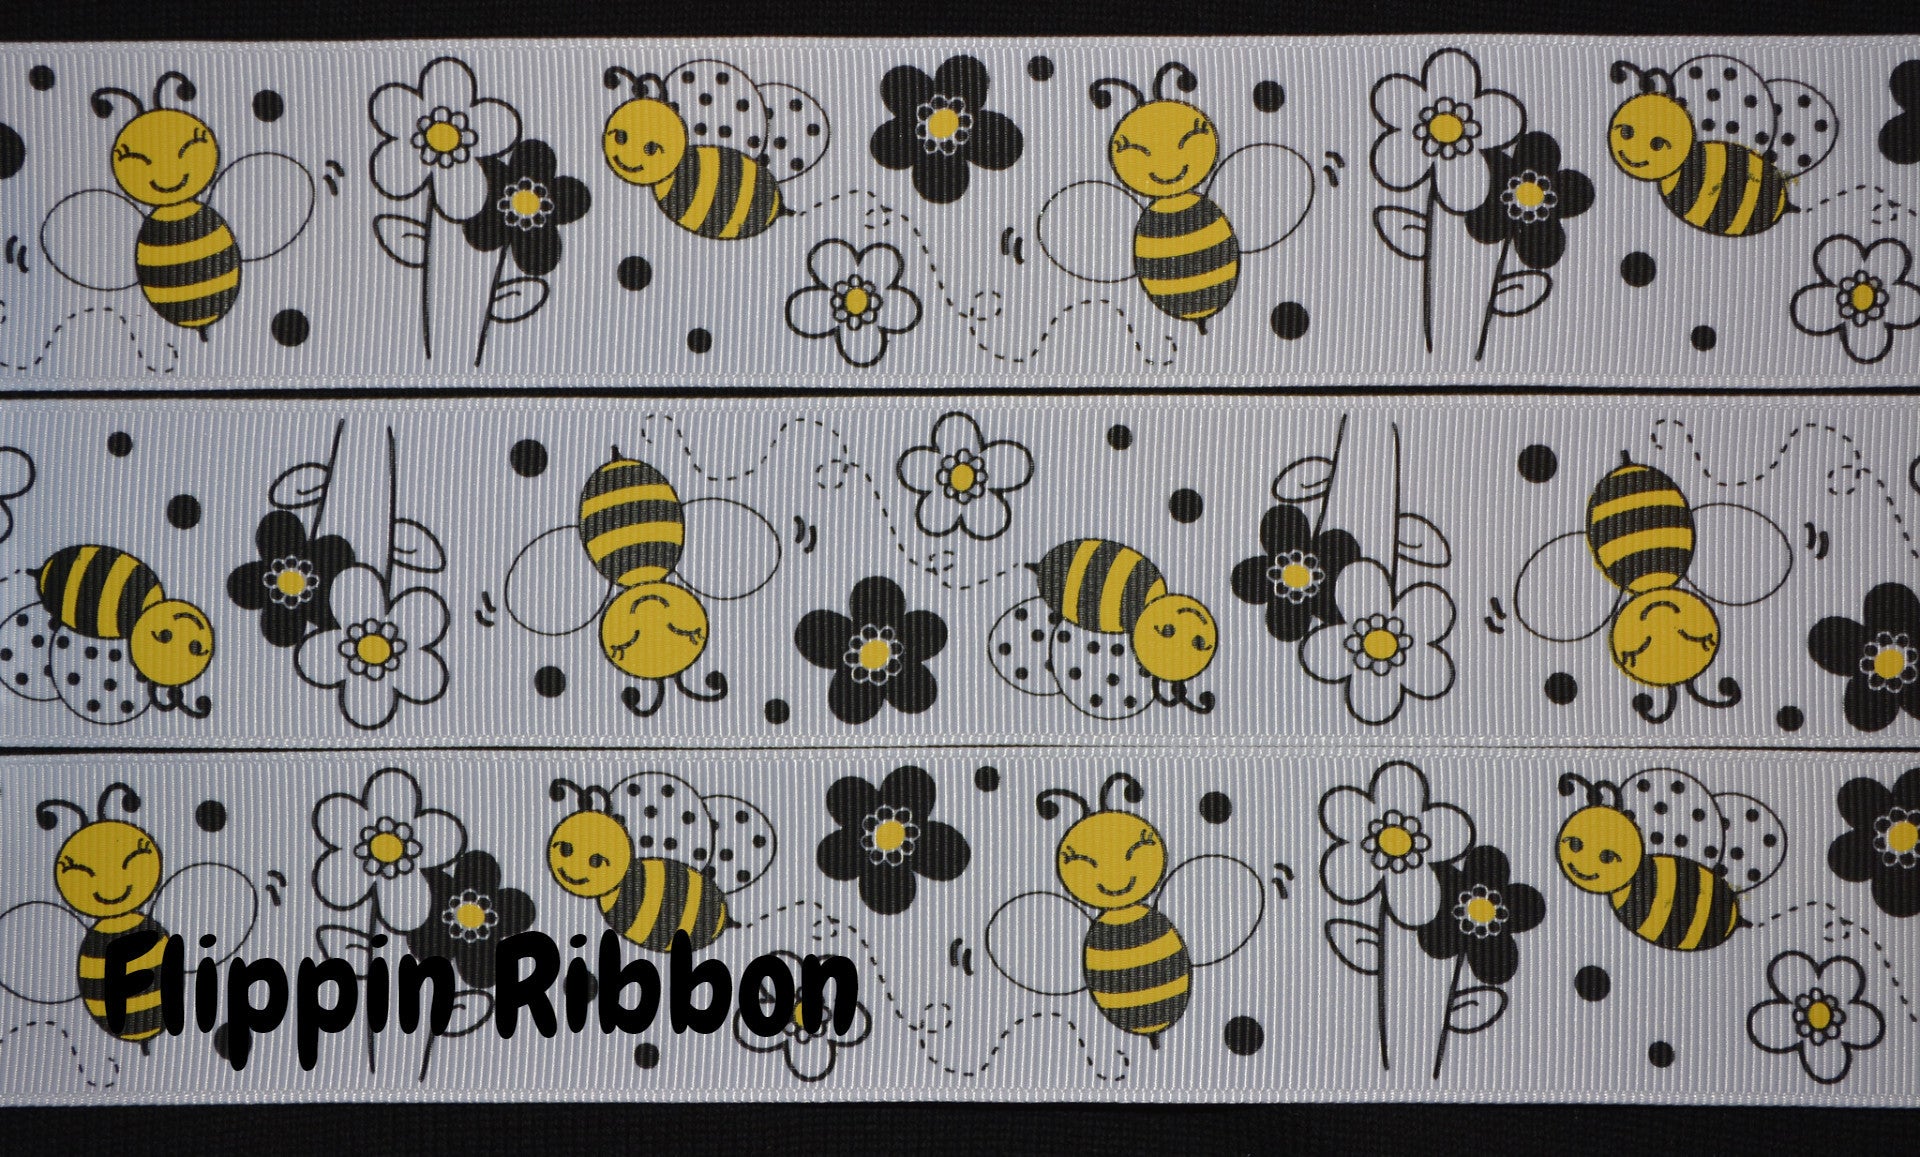 Flowers and Bumble Bee Ribbon - 1 1/2 inch Printed Grosgrain